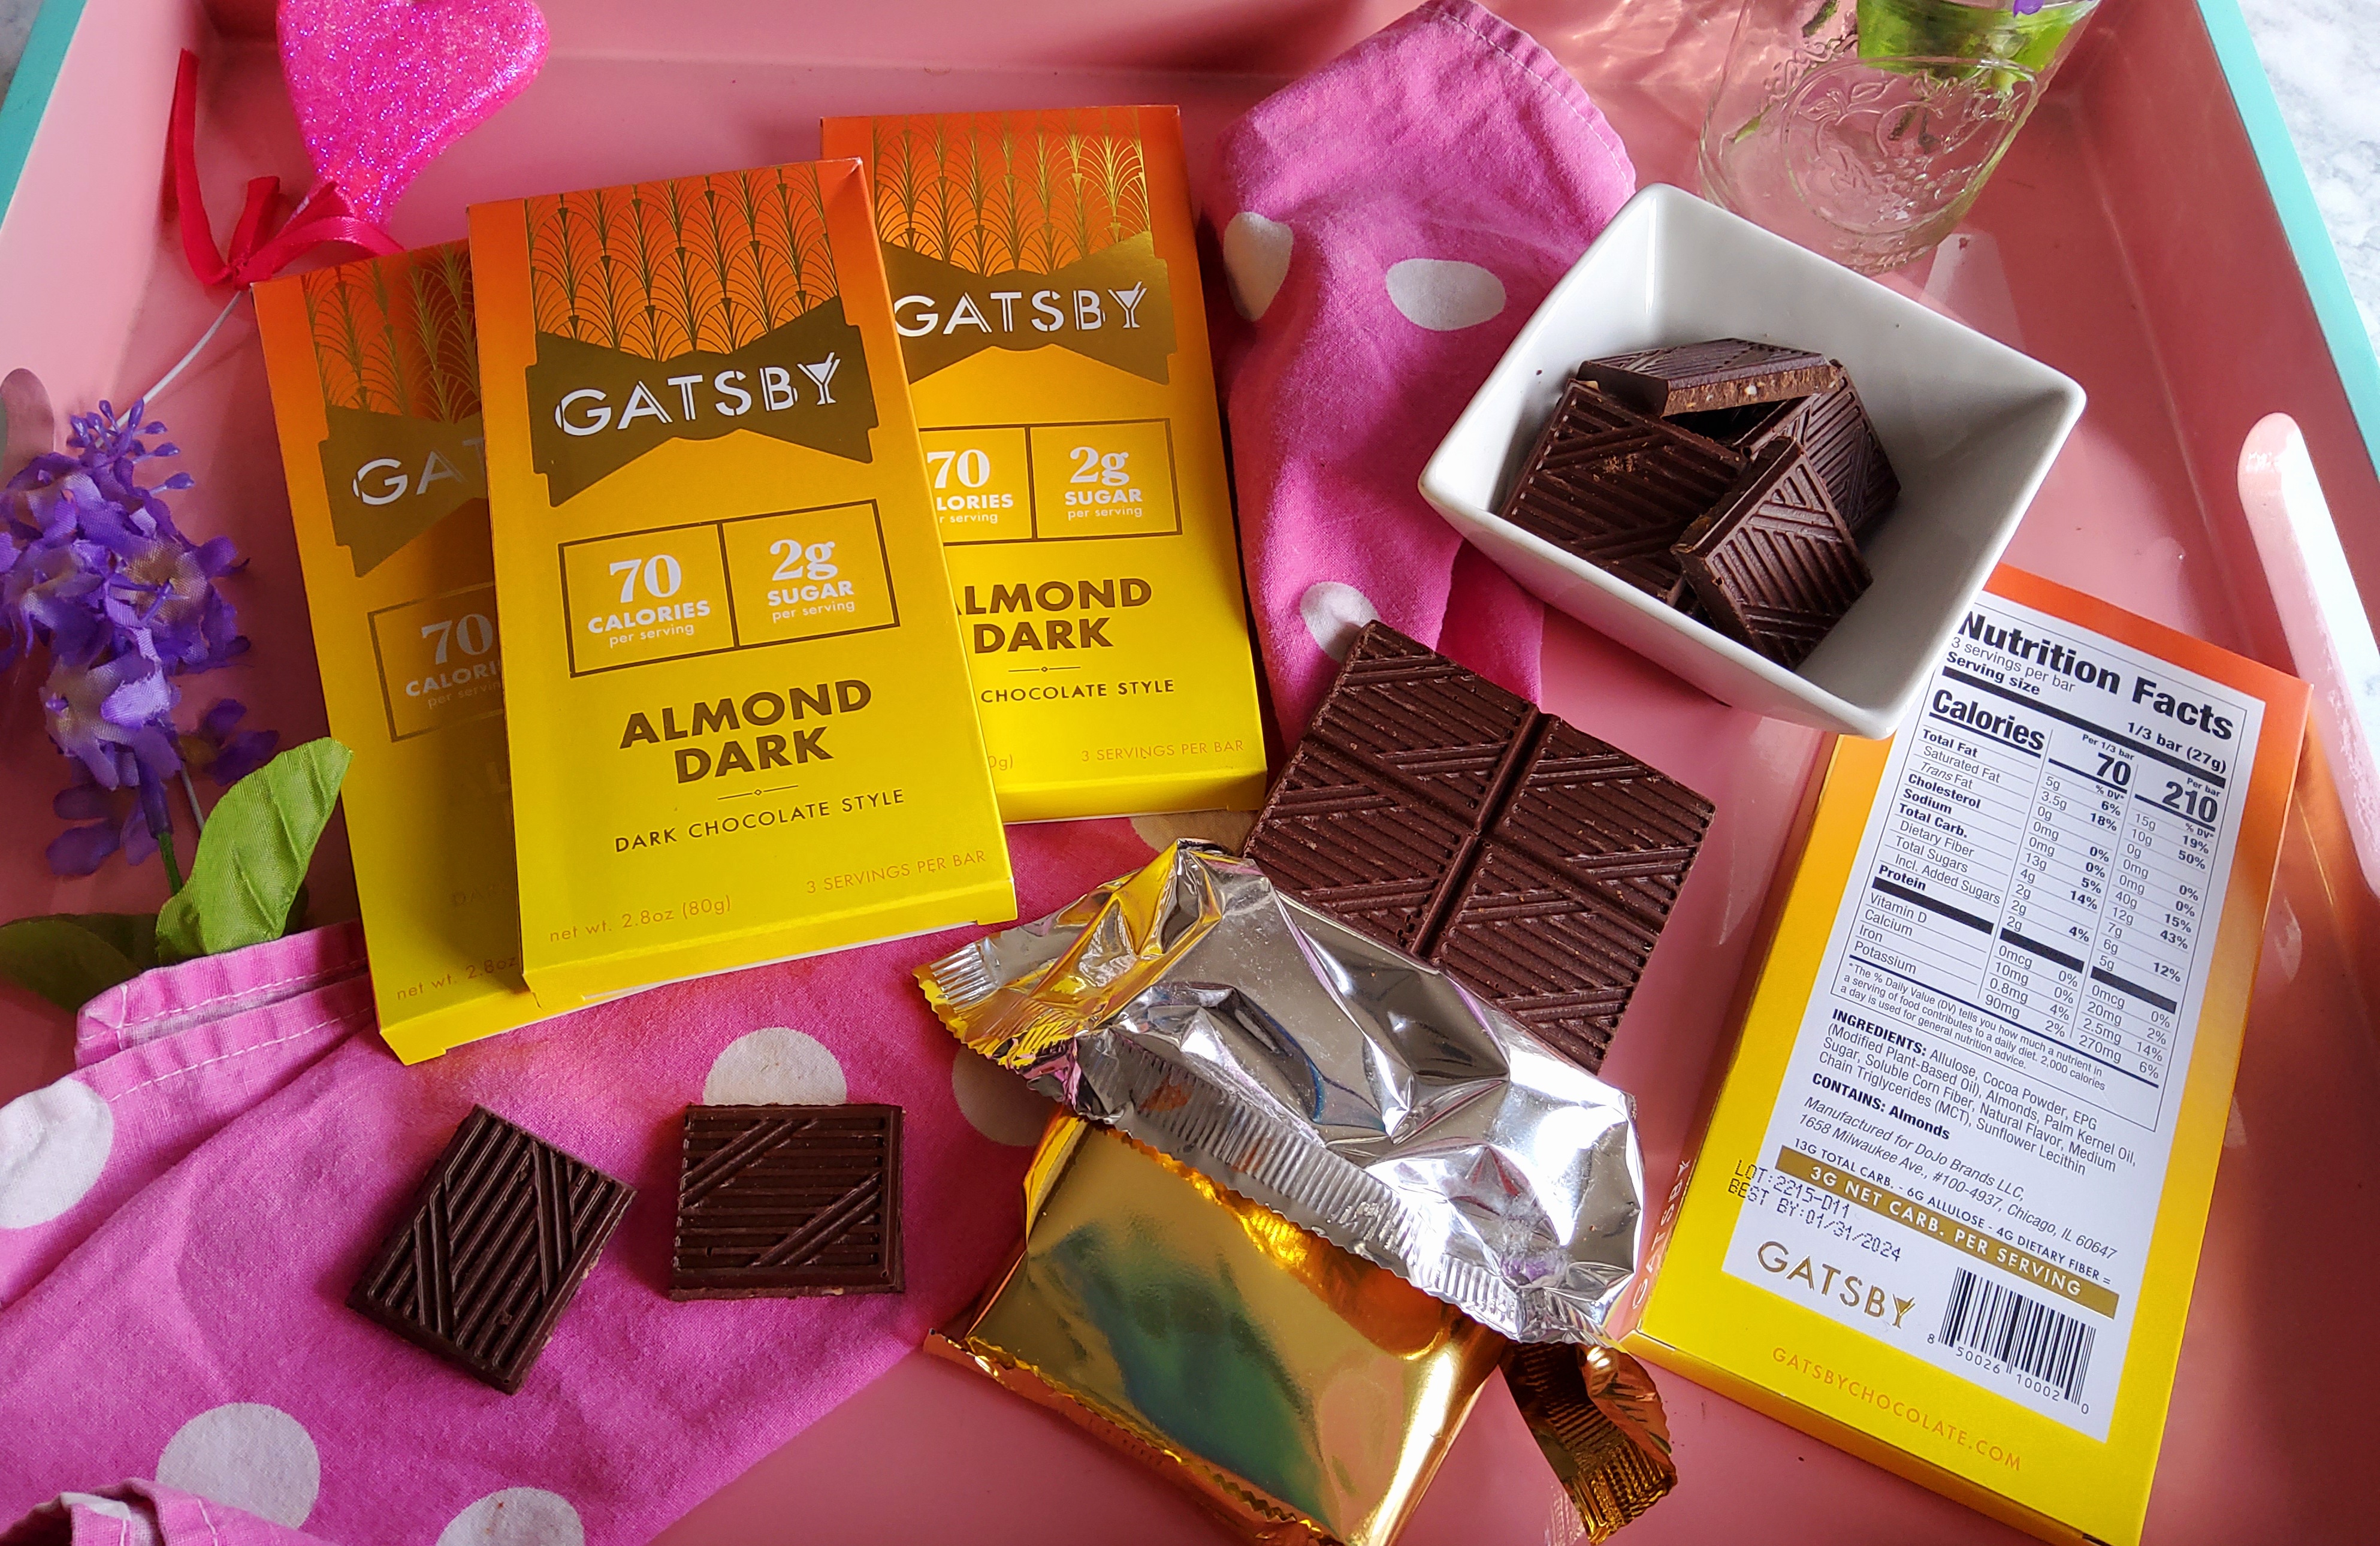 Save on Gatsby Sea Salt Extra Dark Bar Chocolate Style Order Online  Delivery